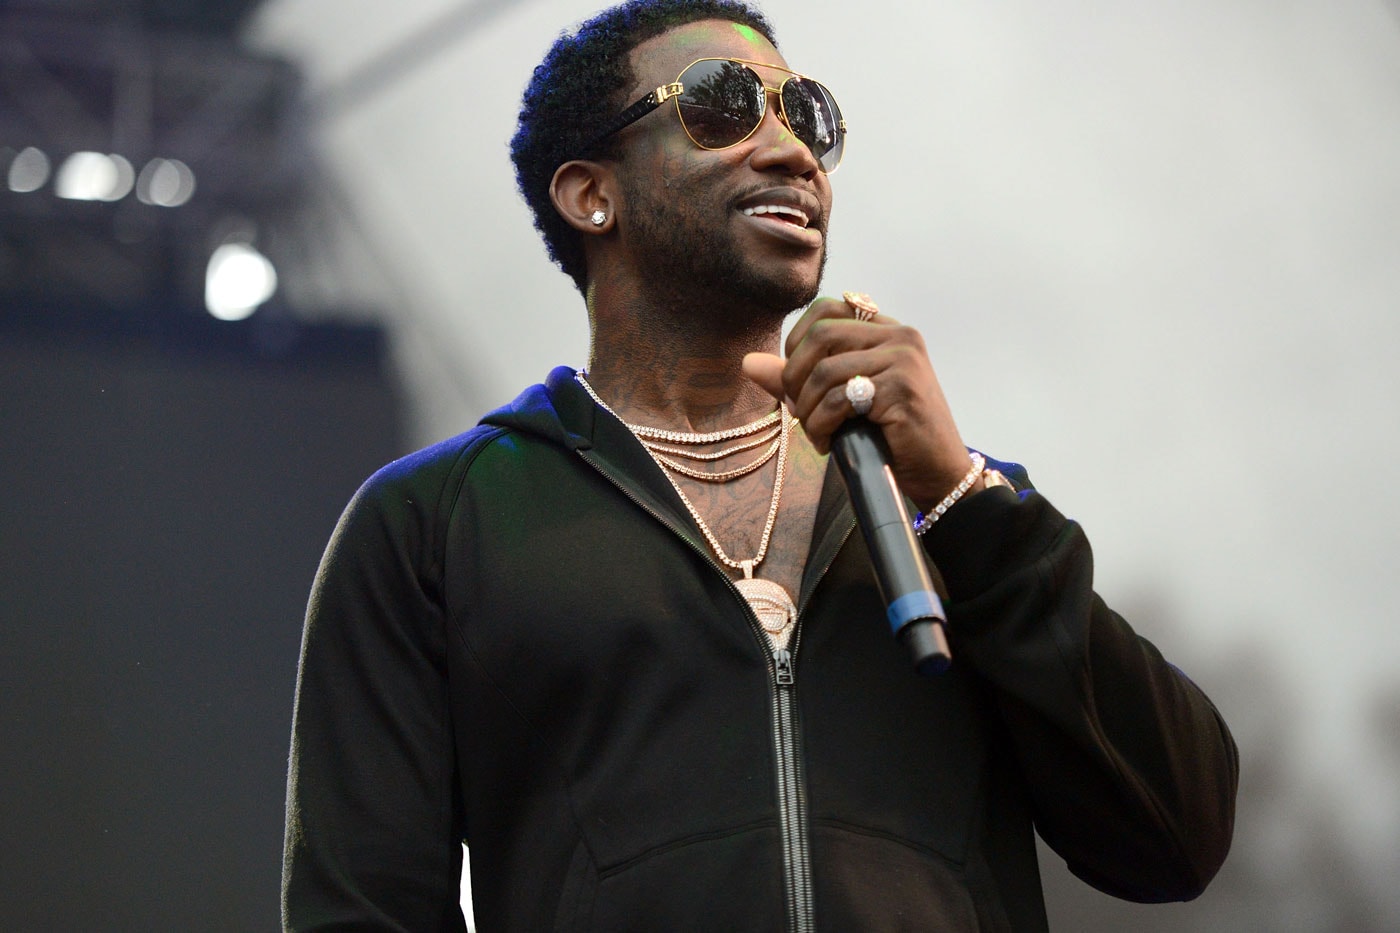 Gucci Mane featuring Rich Homie Quan & Peewee Longway - No Problems